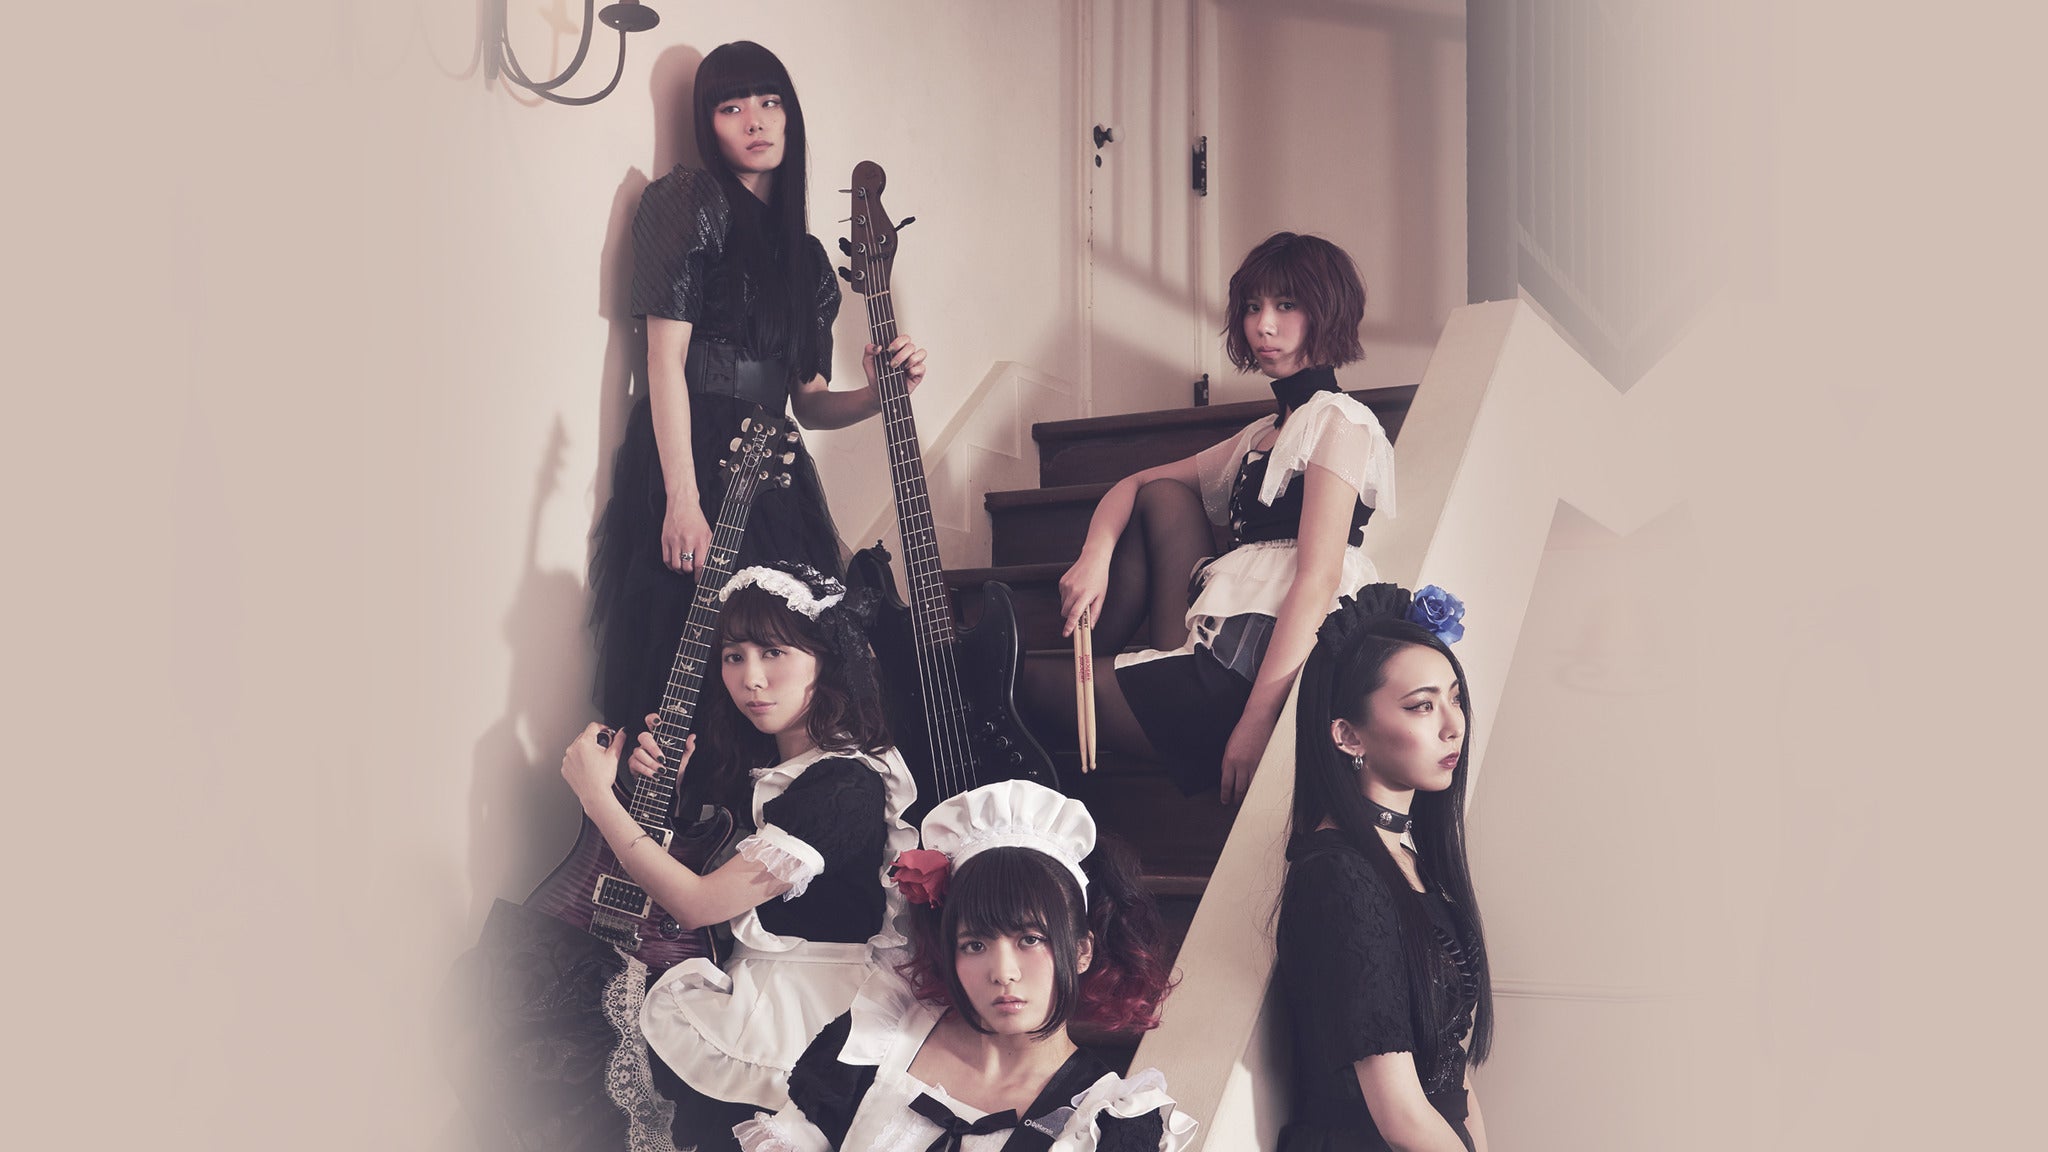 BAND-MAID WORLD DOMINATION TOUR 2019 ~gekidou~ in New York promo photo for VIP Package Public Onsale presale offer code